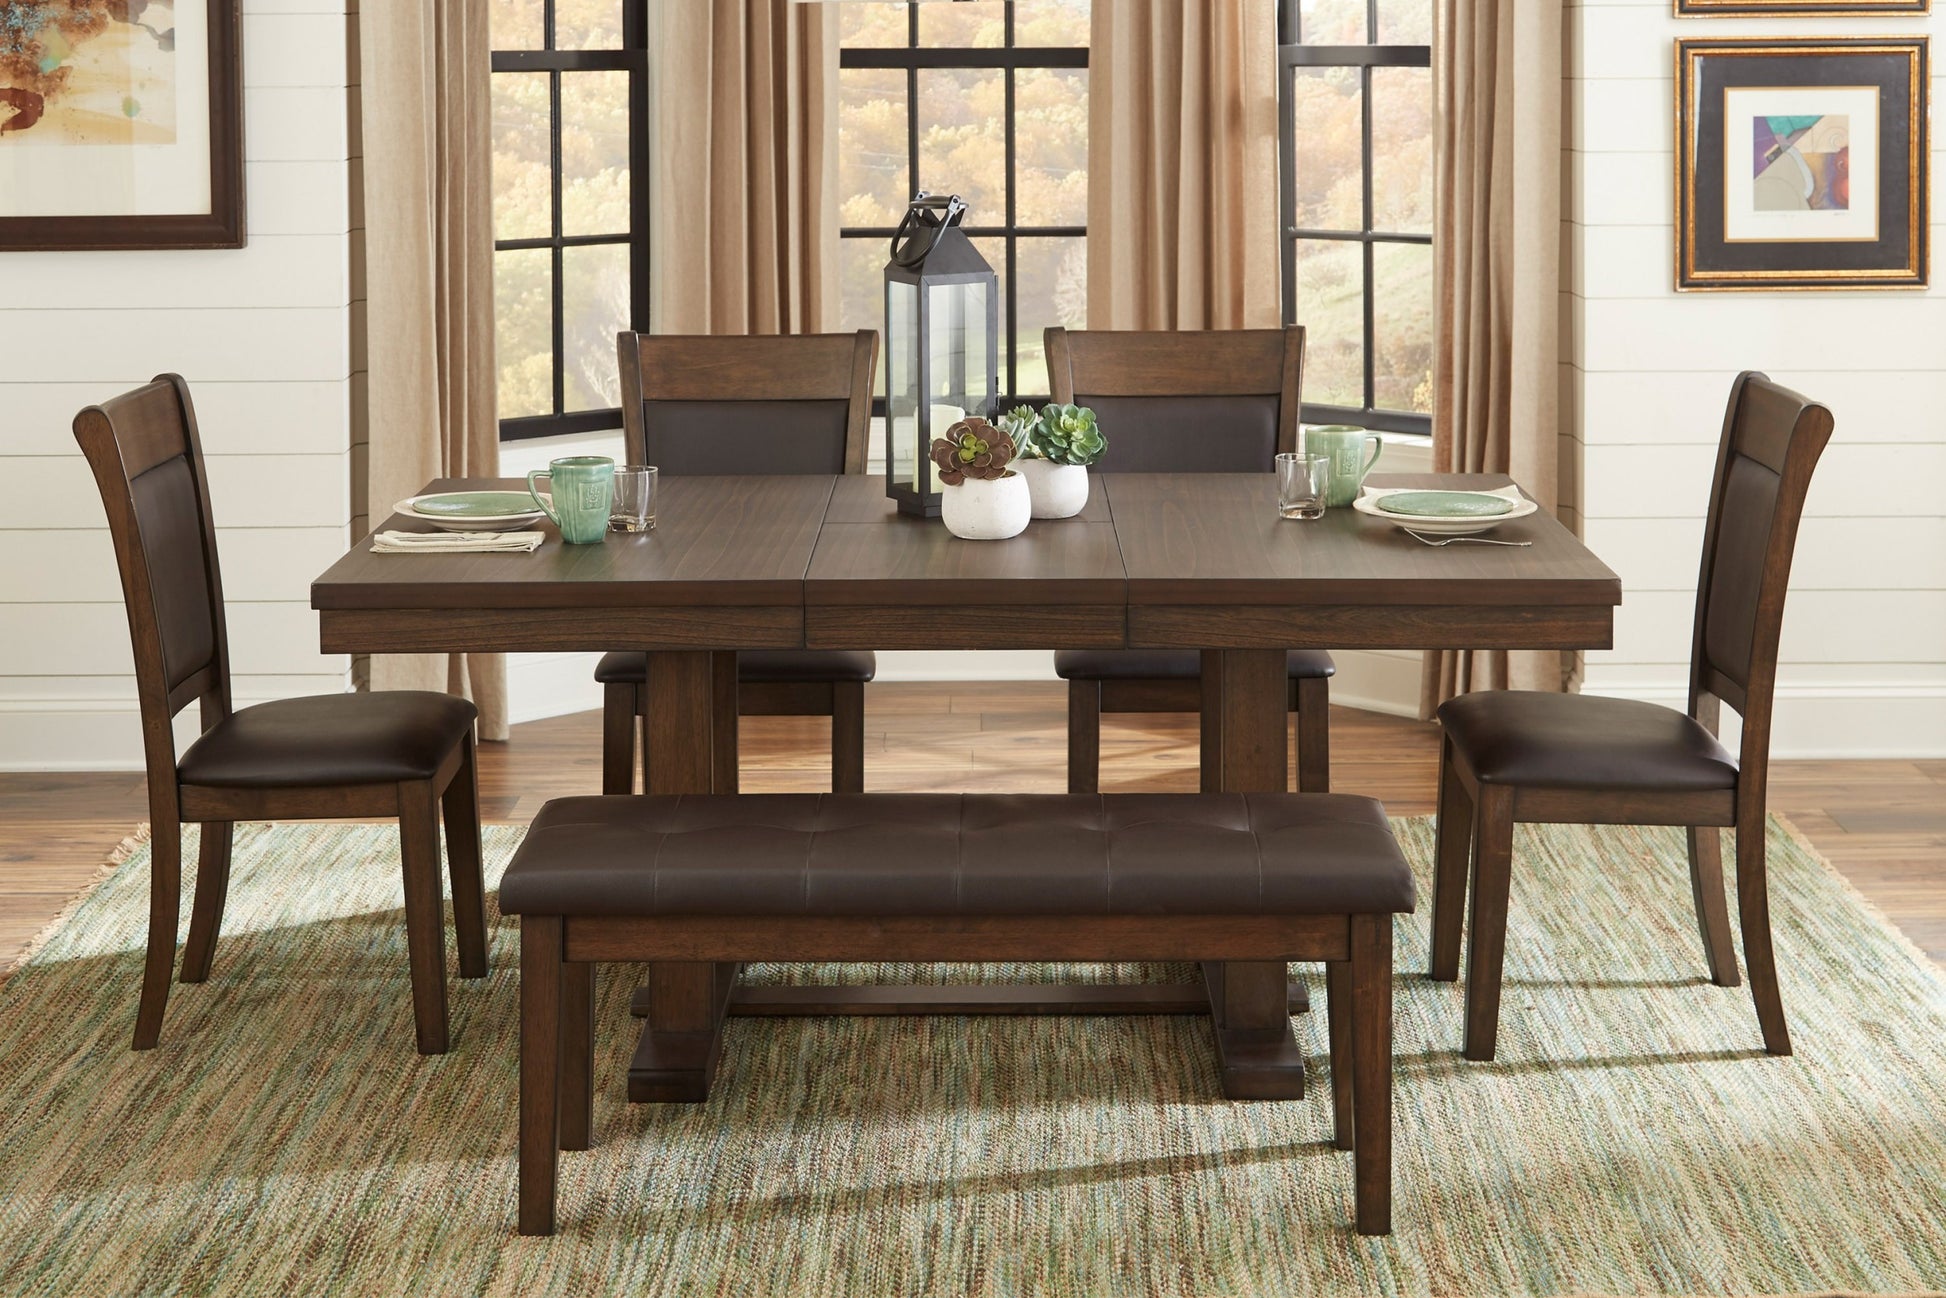 Transitional Dining Furniture 1pc Wooden Bench Button brown mix-dining room-transitional-wood